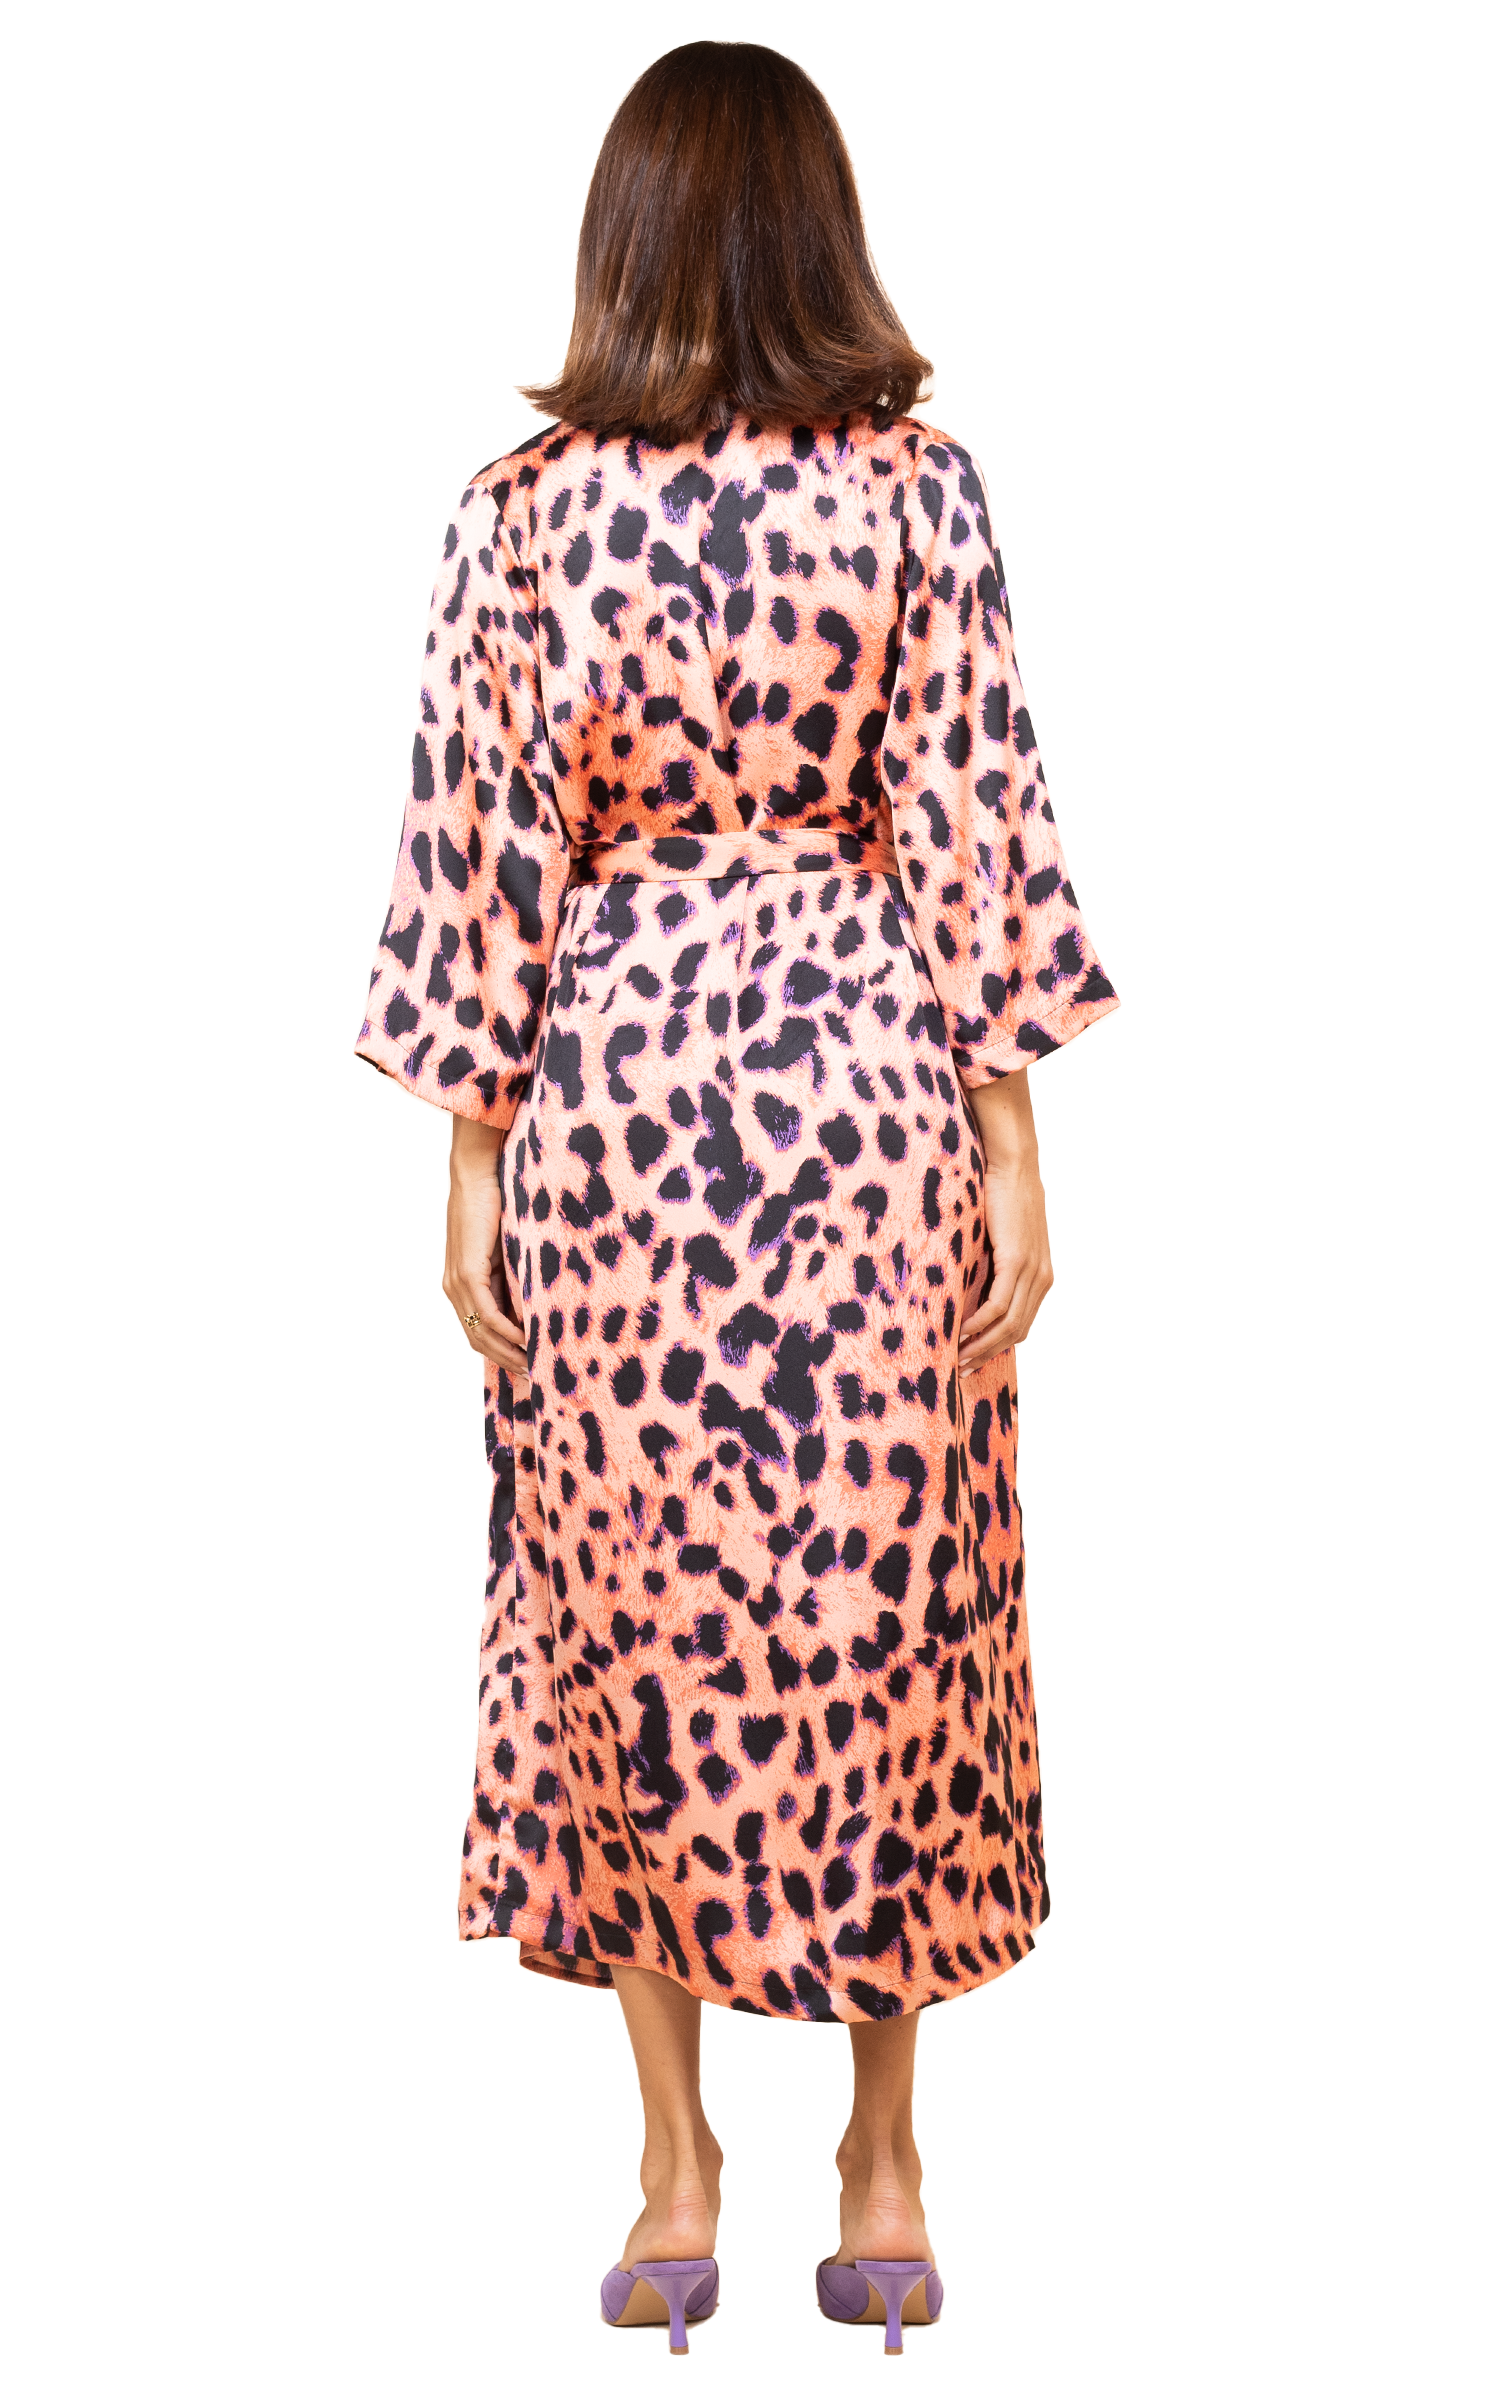 Sleep dress and robe set in nude leopard by Dancing Leopard